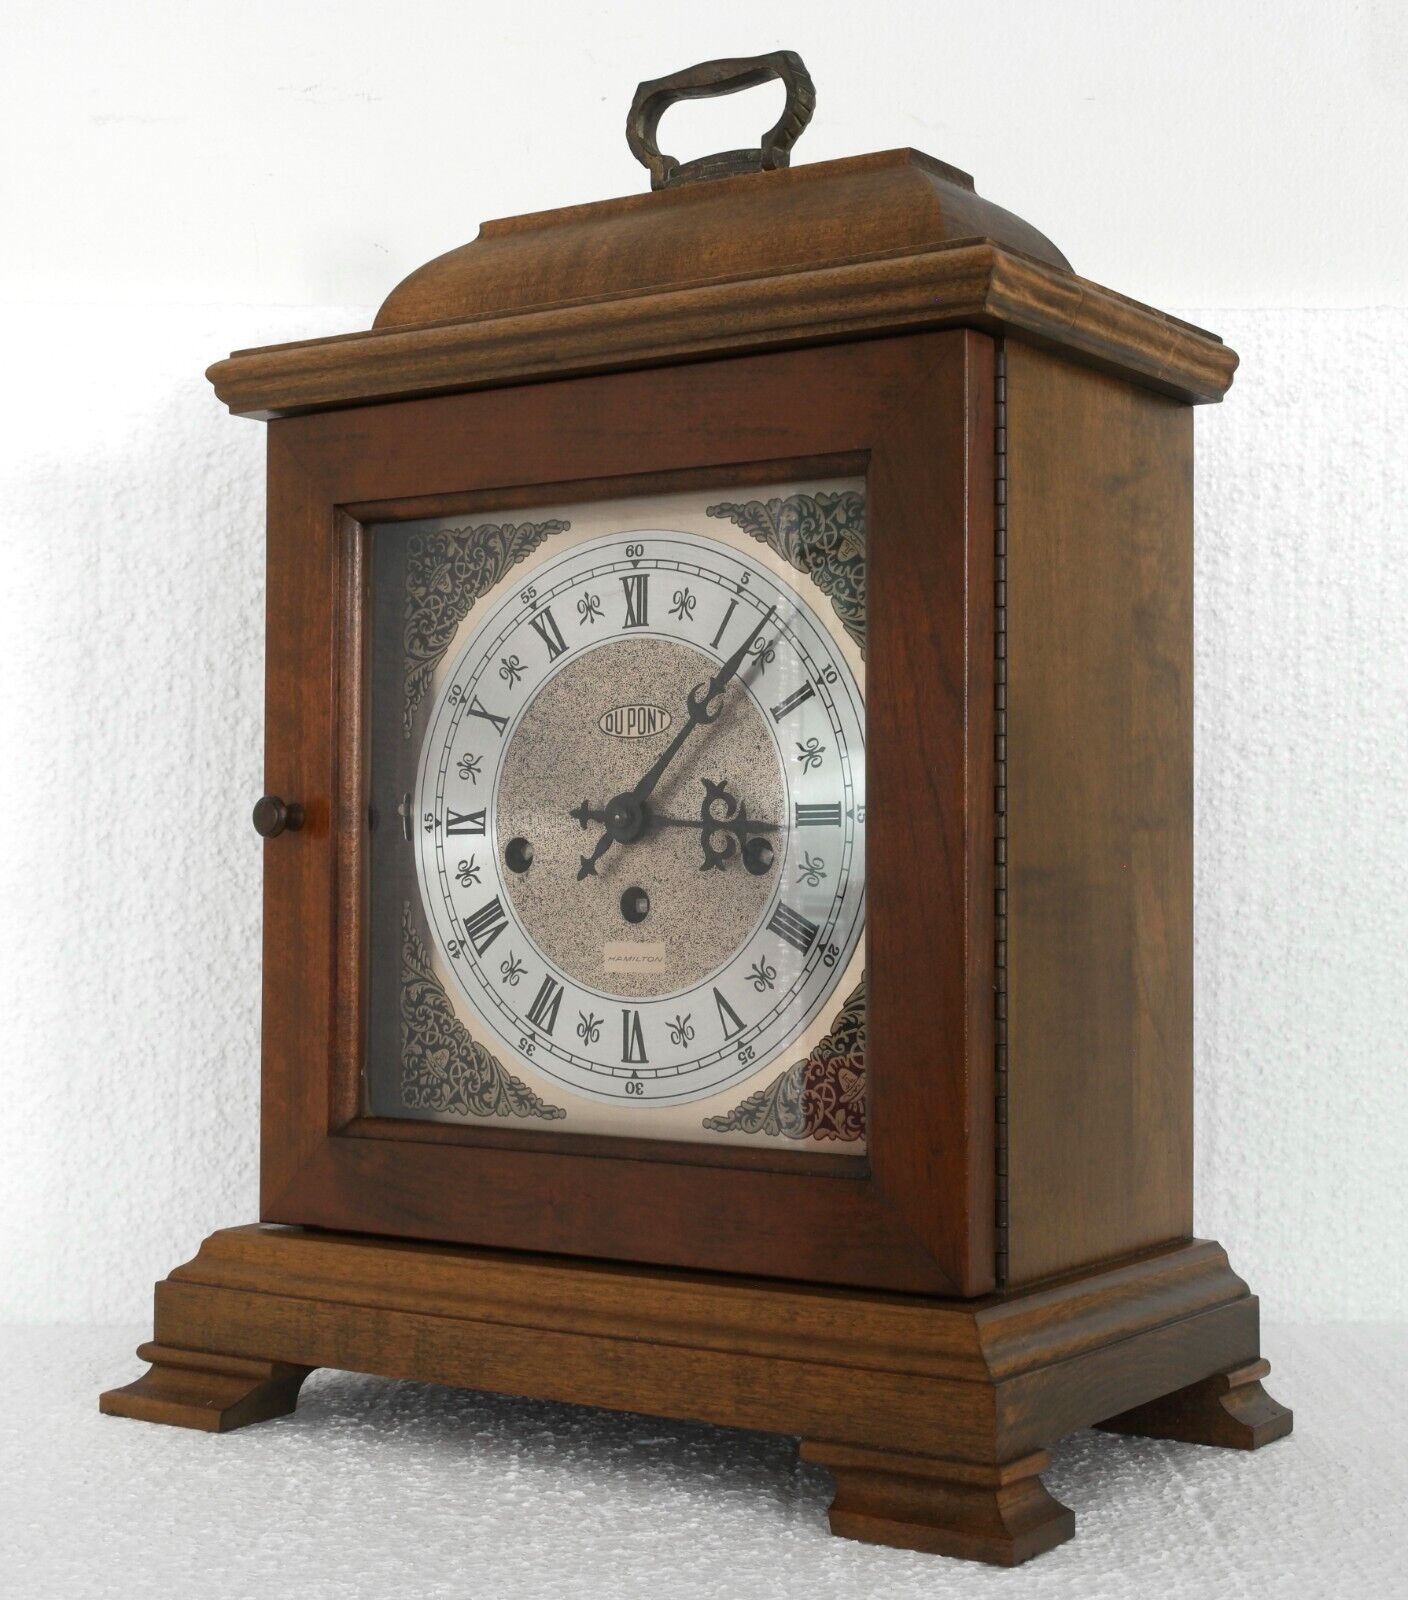 Hamilton Wheatland Westminster Chime Mantle Clock 340-020 W Germany ( Dupont )